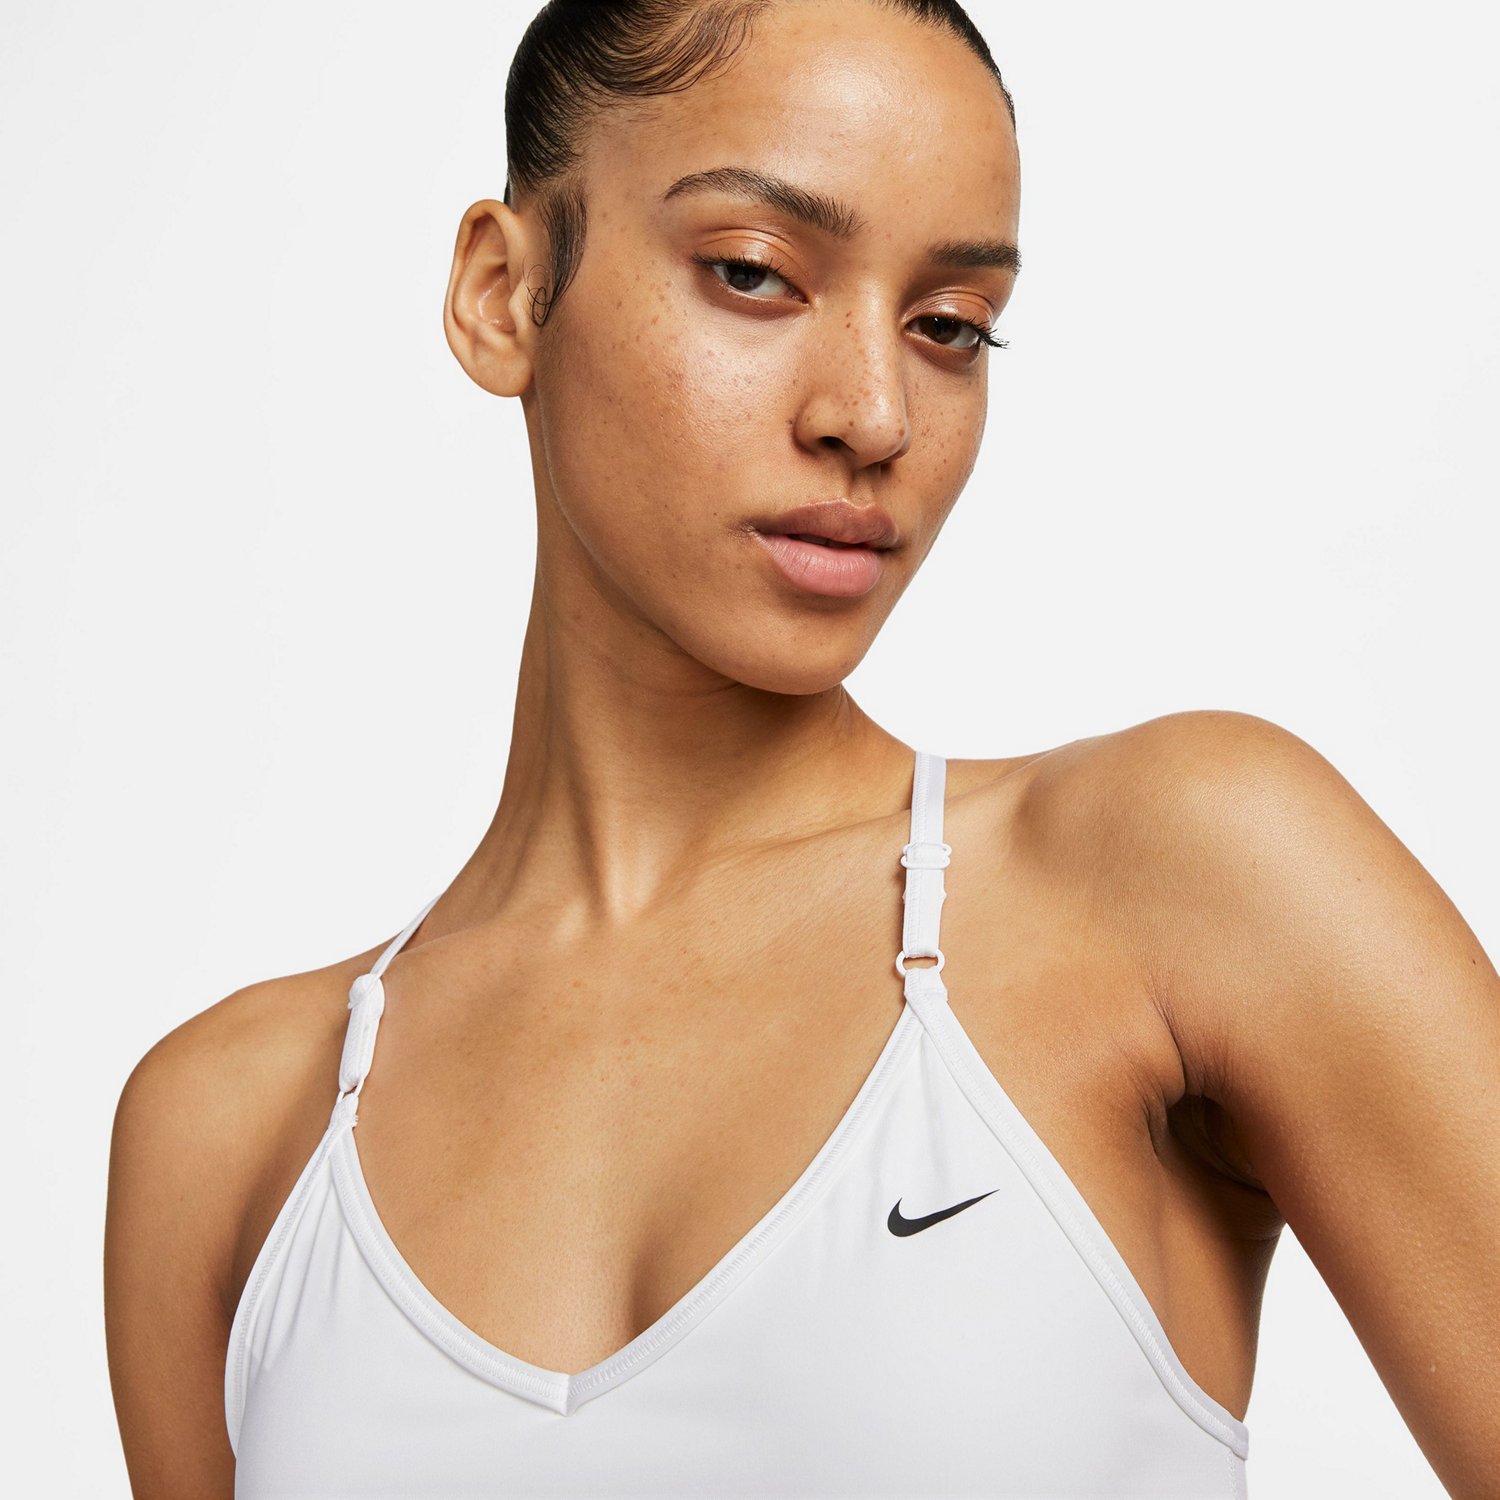 Nike Dri-FIT Dedication Airborne Tank Top with Built In Sports Bra